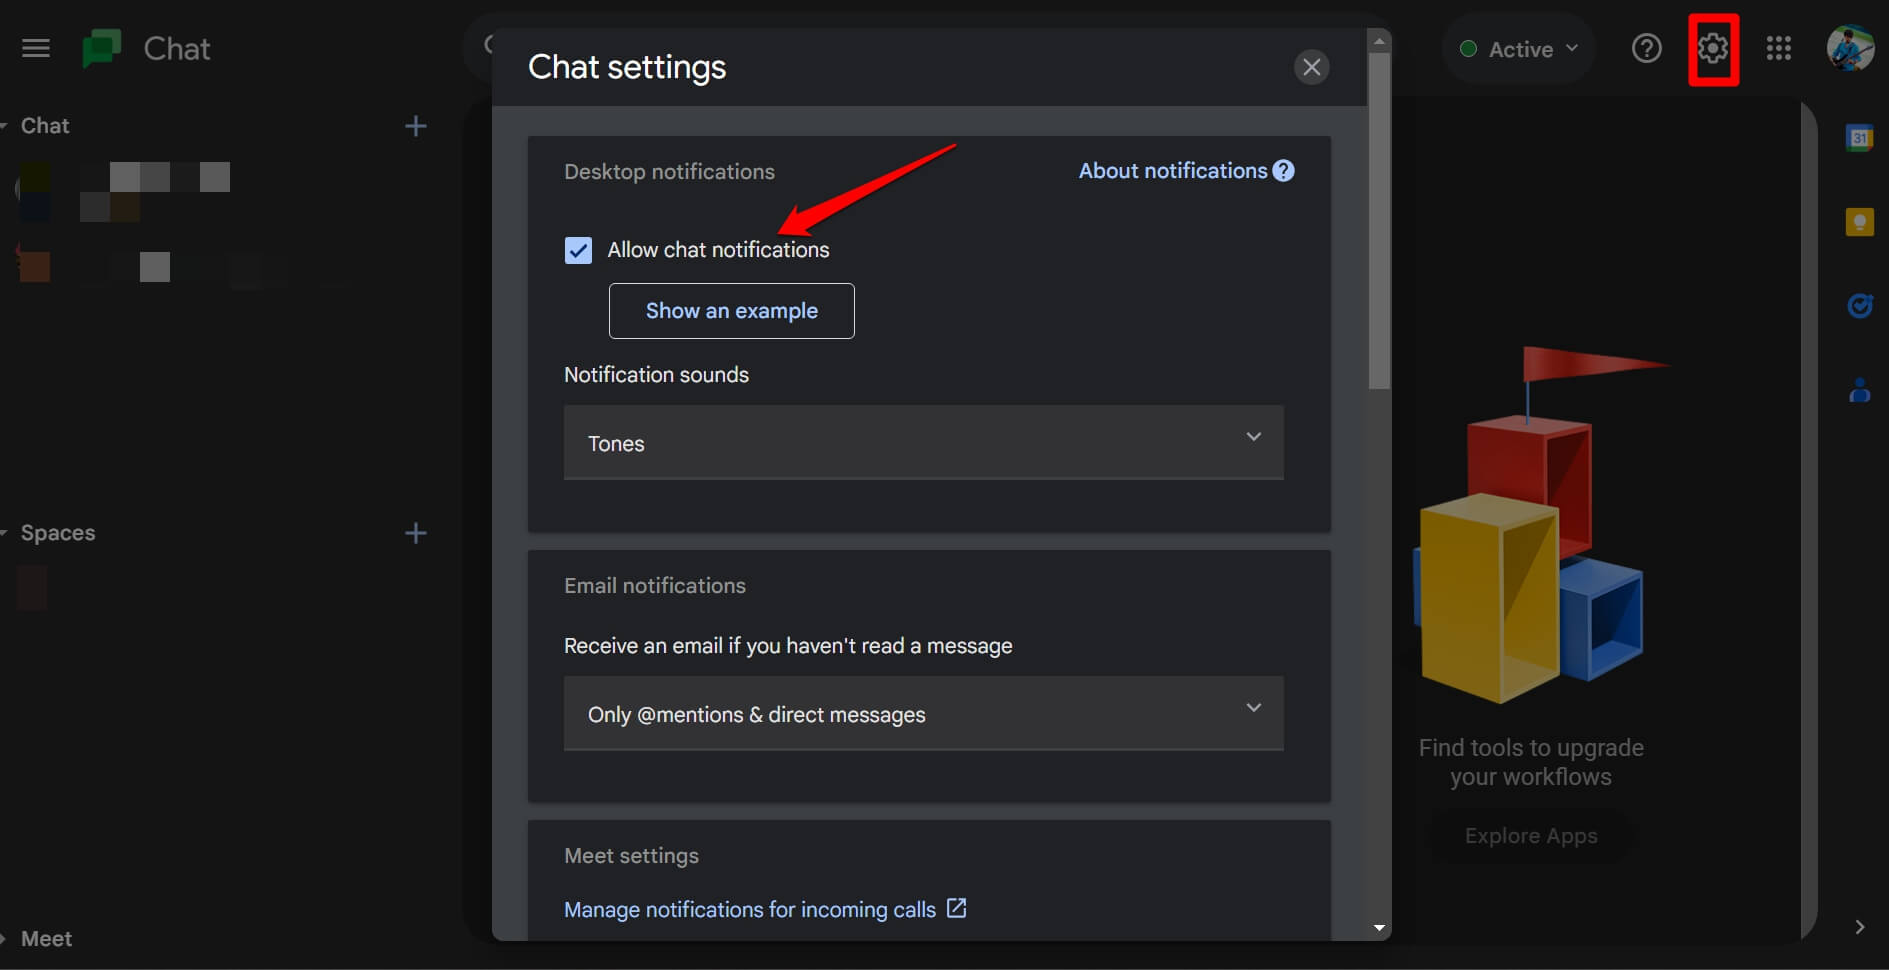 enable chat notifications on Google Chat app